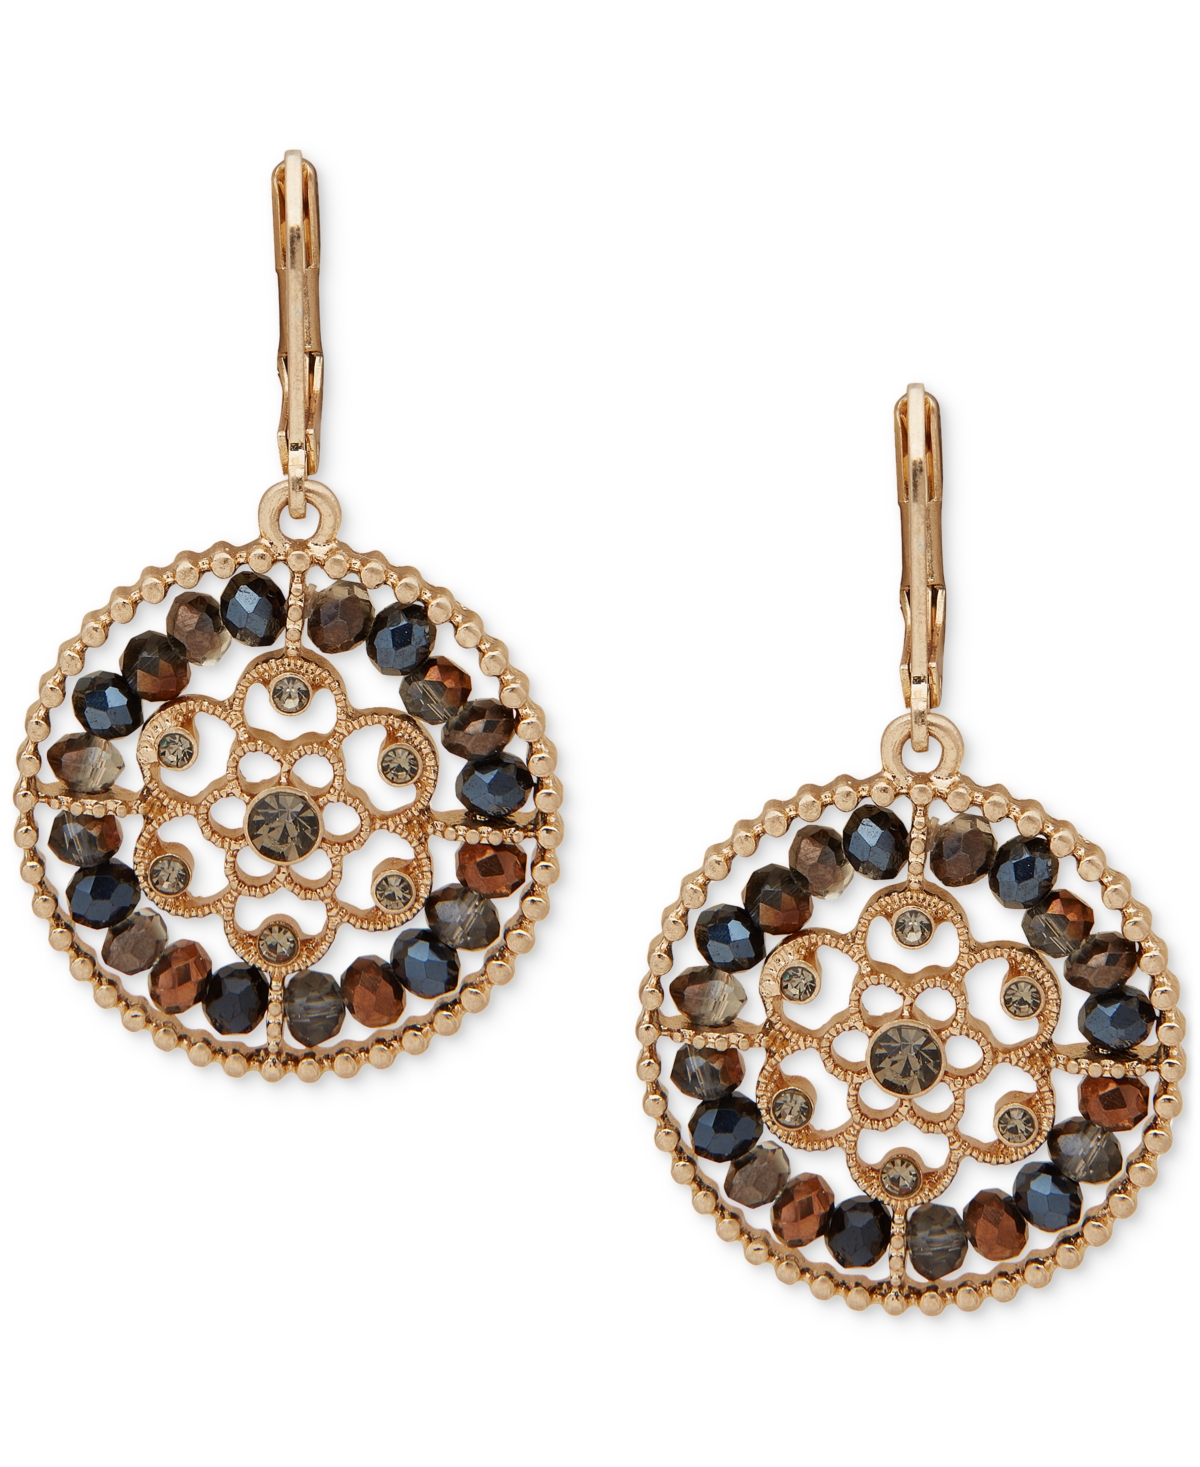 lonna & lilly Gold-Tone Pave Flower Beaded Drop Earrings